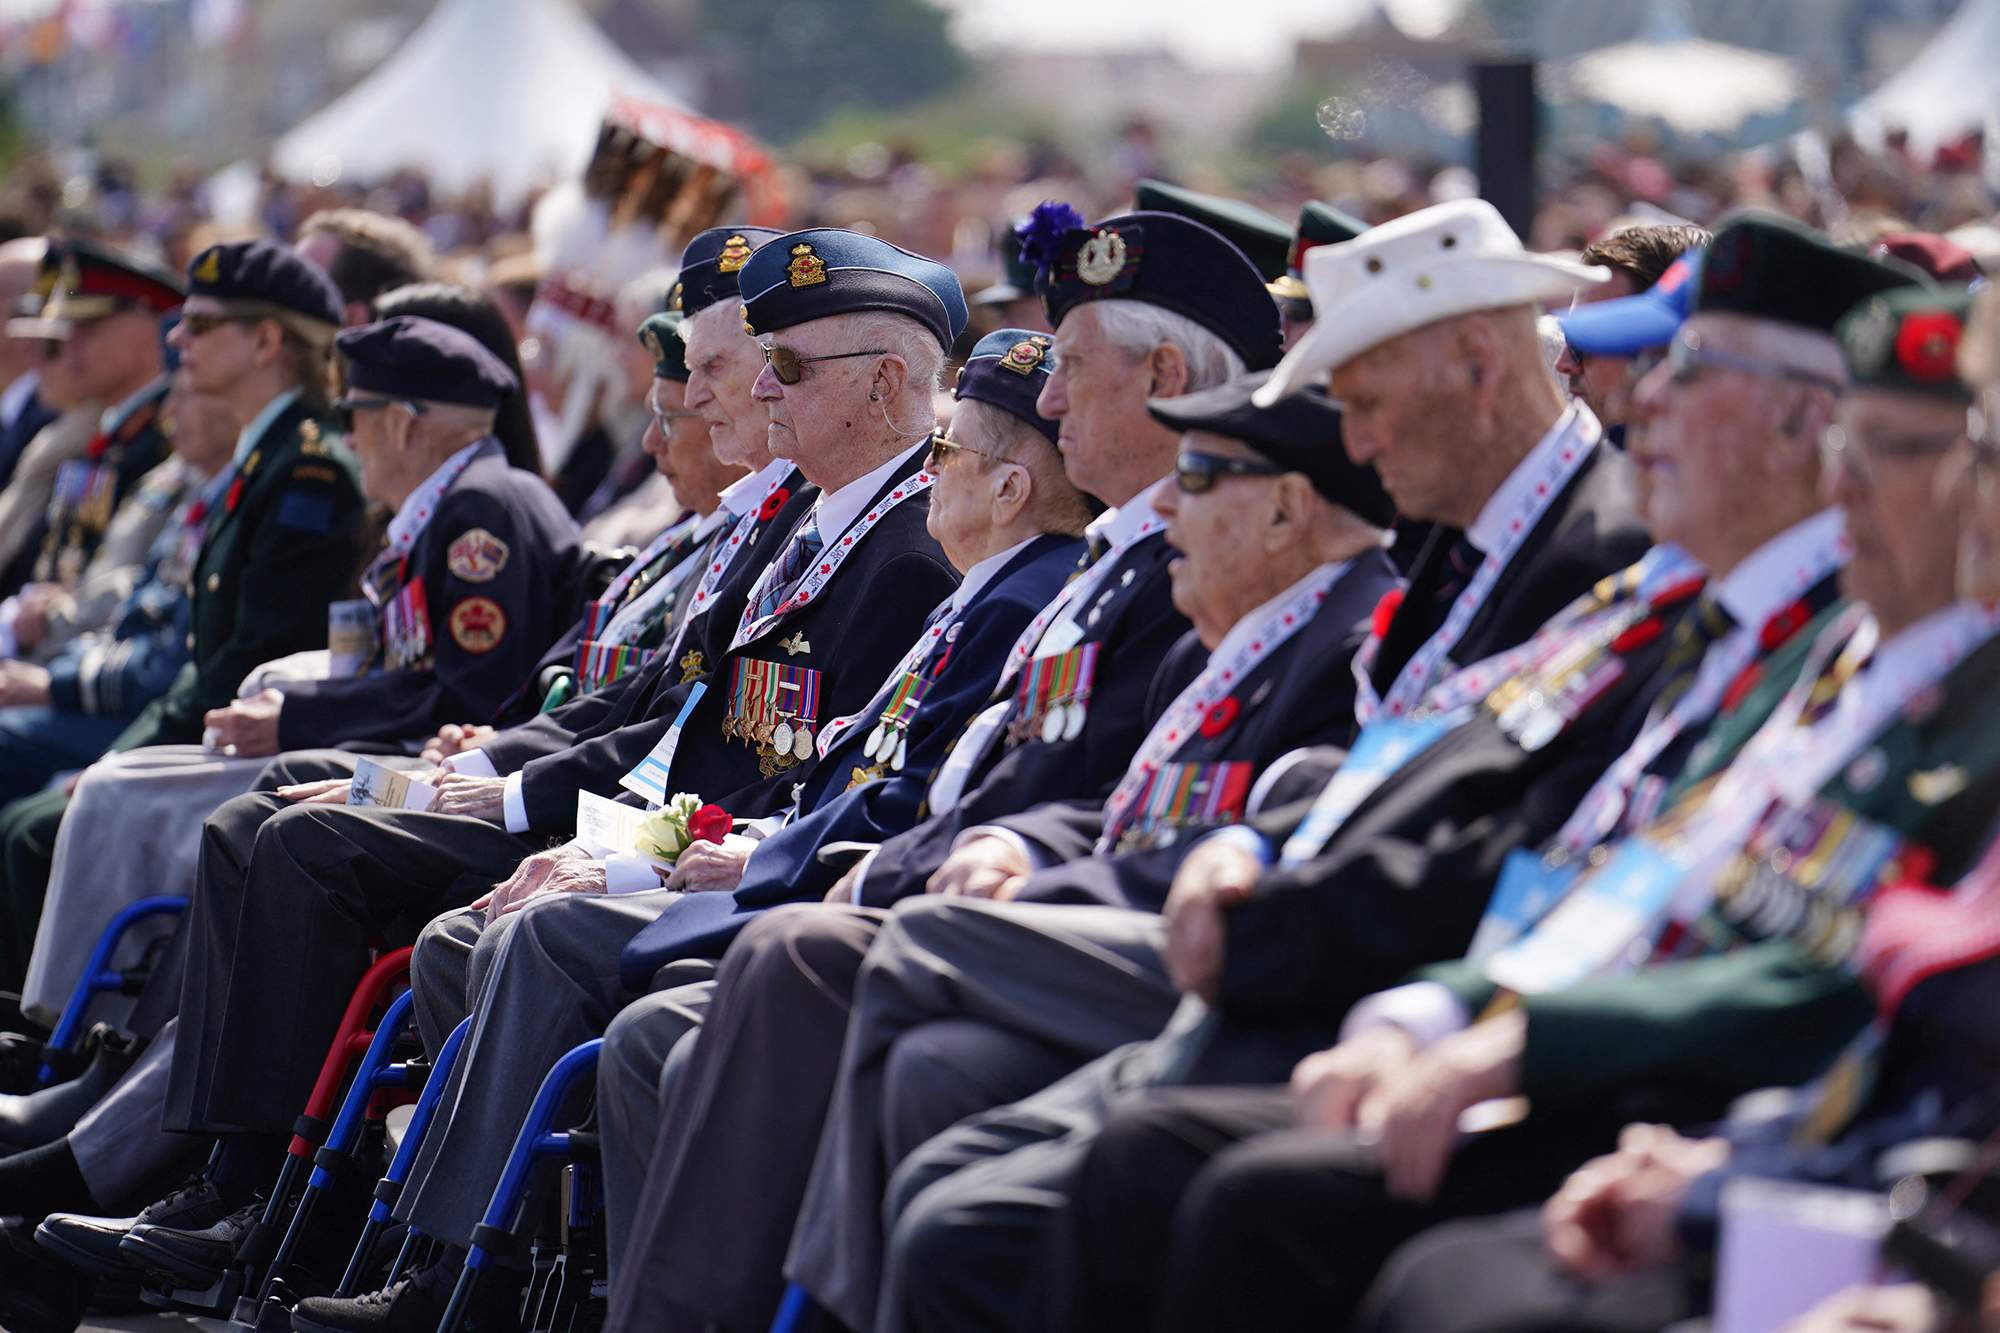 Veterans attend the Canadian commemorative ceremony at the British Normandy Memorial at the Juno Beach Centre, Courseulles-sur-Mer, France, on June 6.